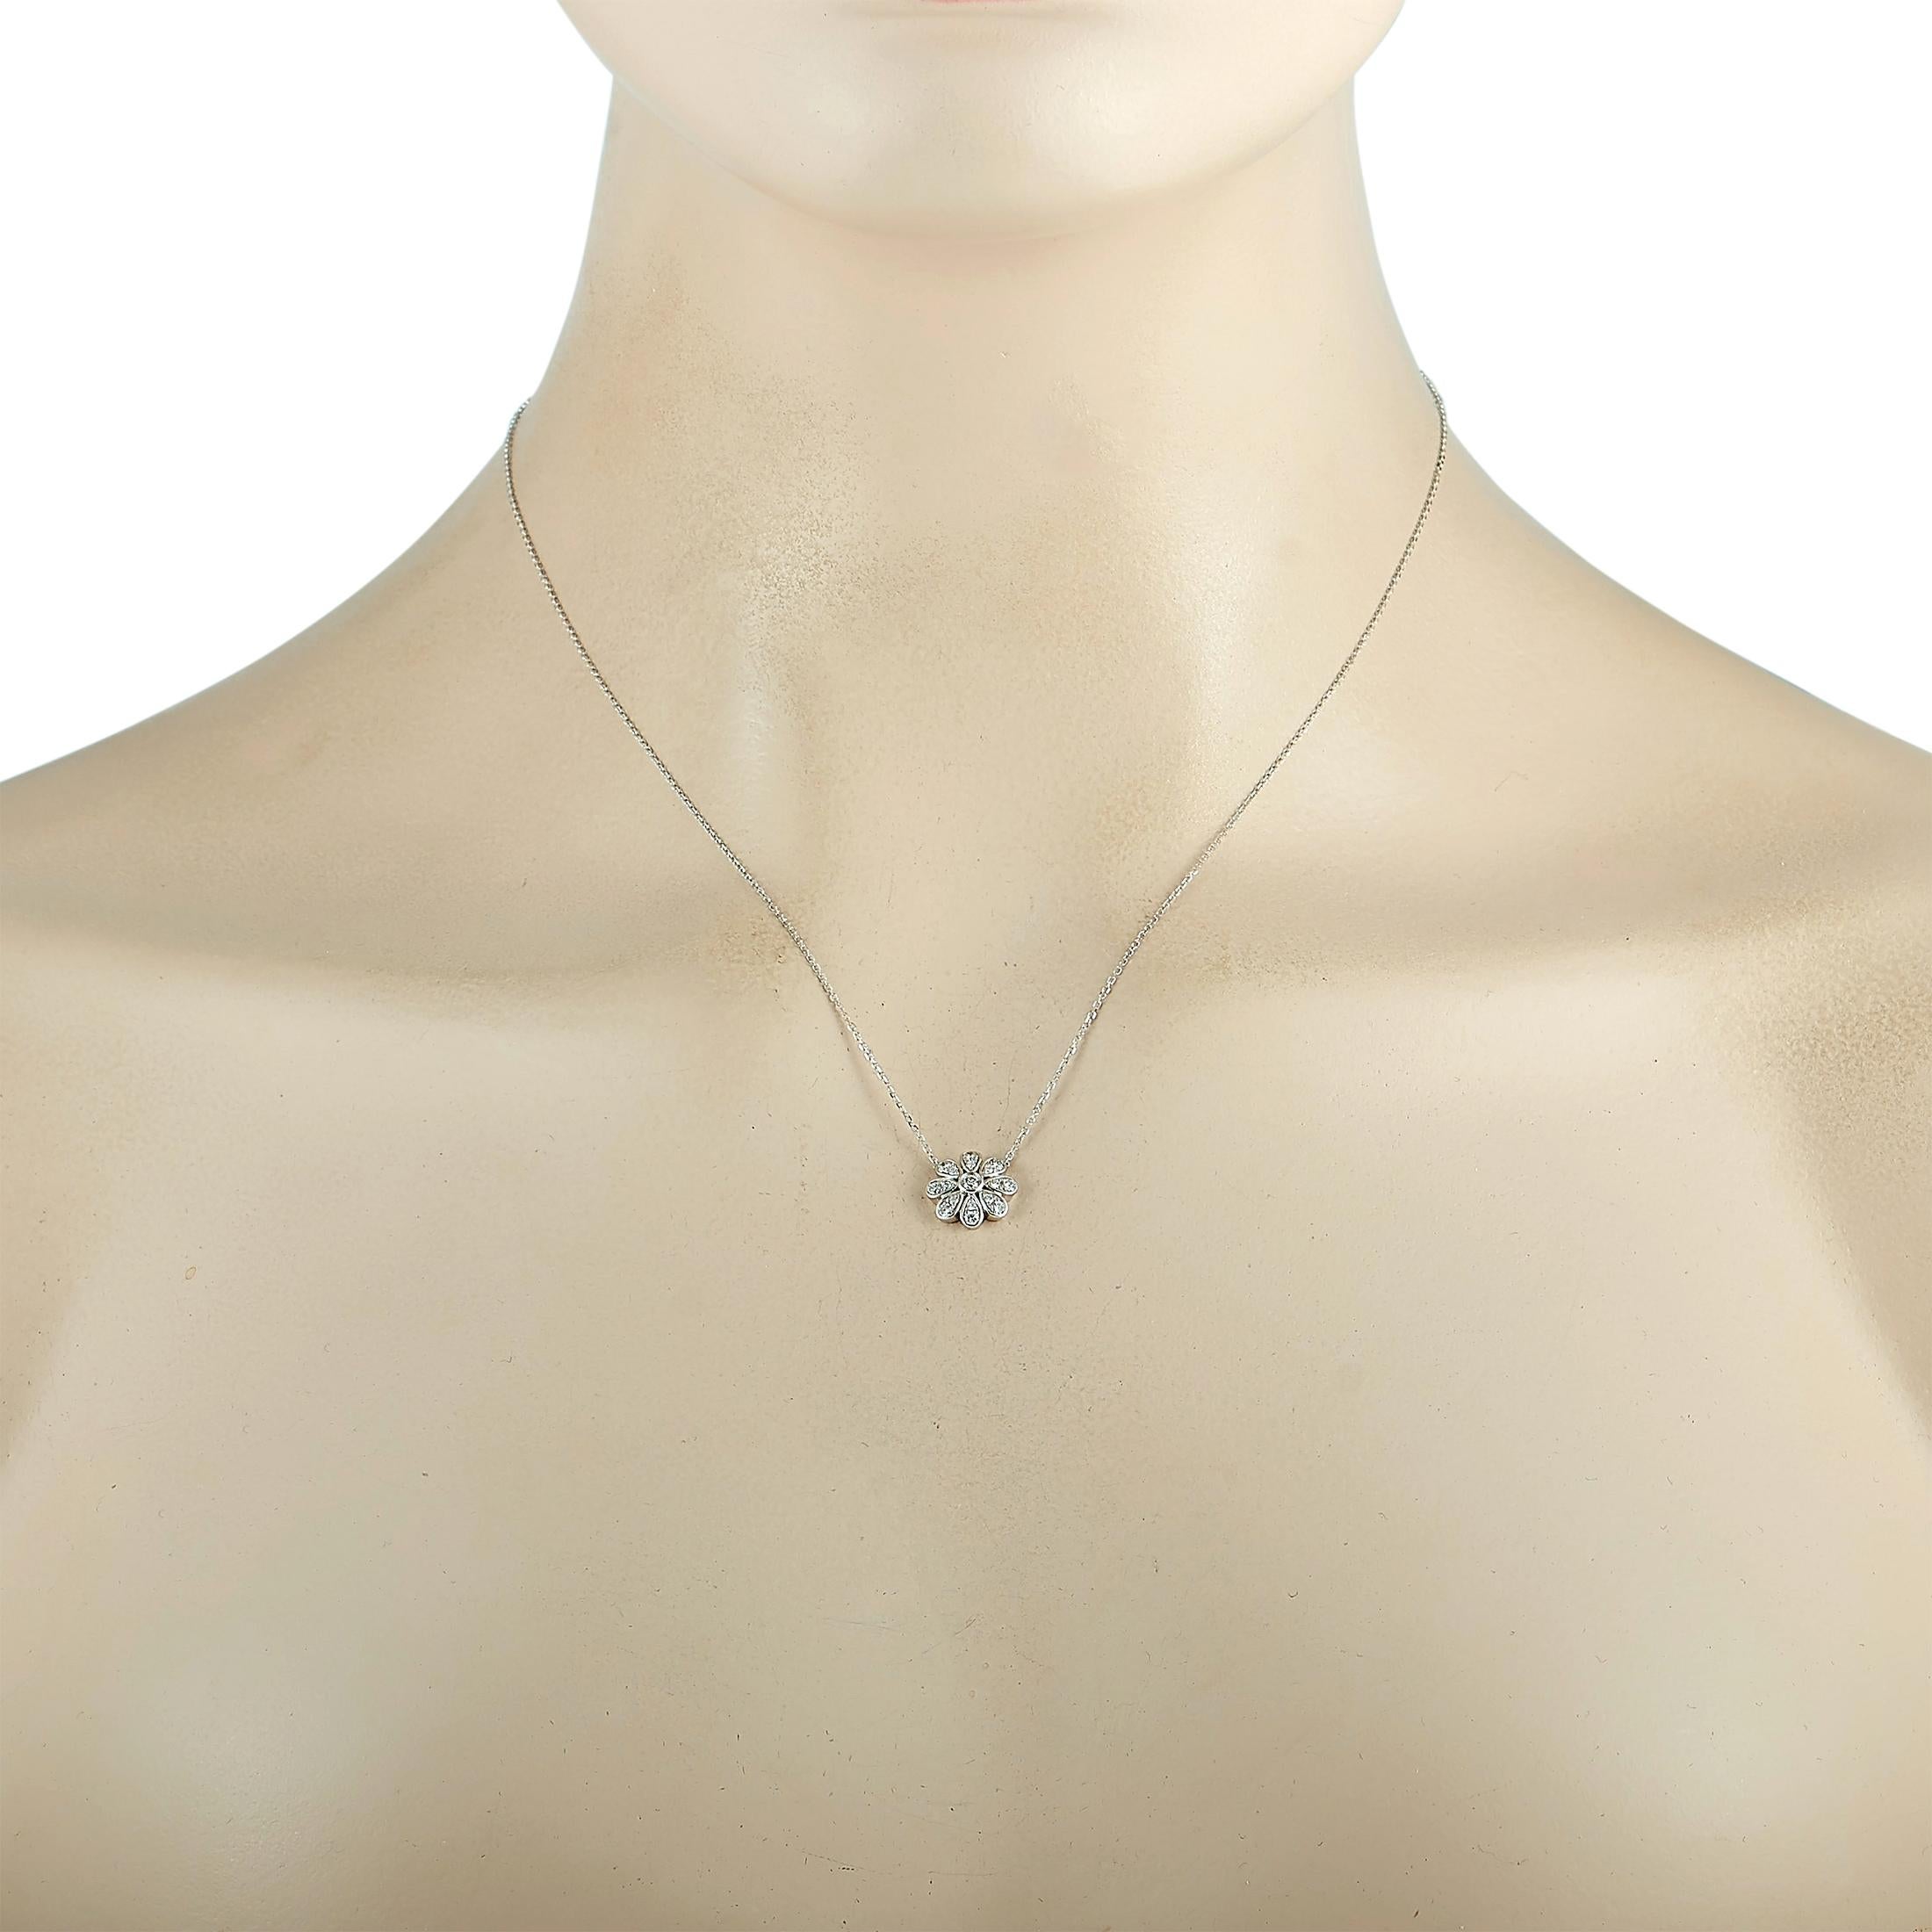 This LB Exclusive necklace is made of 18K white gold and embellished with diamonds that amount to 0.35 carats. The necklace weighs 3.2 grams and boasts an 18” chain and a flower pendant that measures 0.45” in length and 0.45” in width.
 
 Offered in